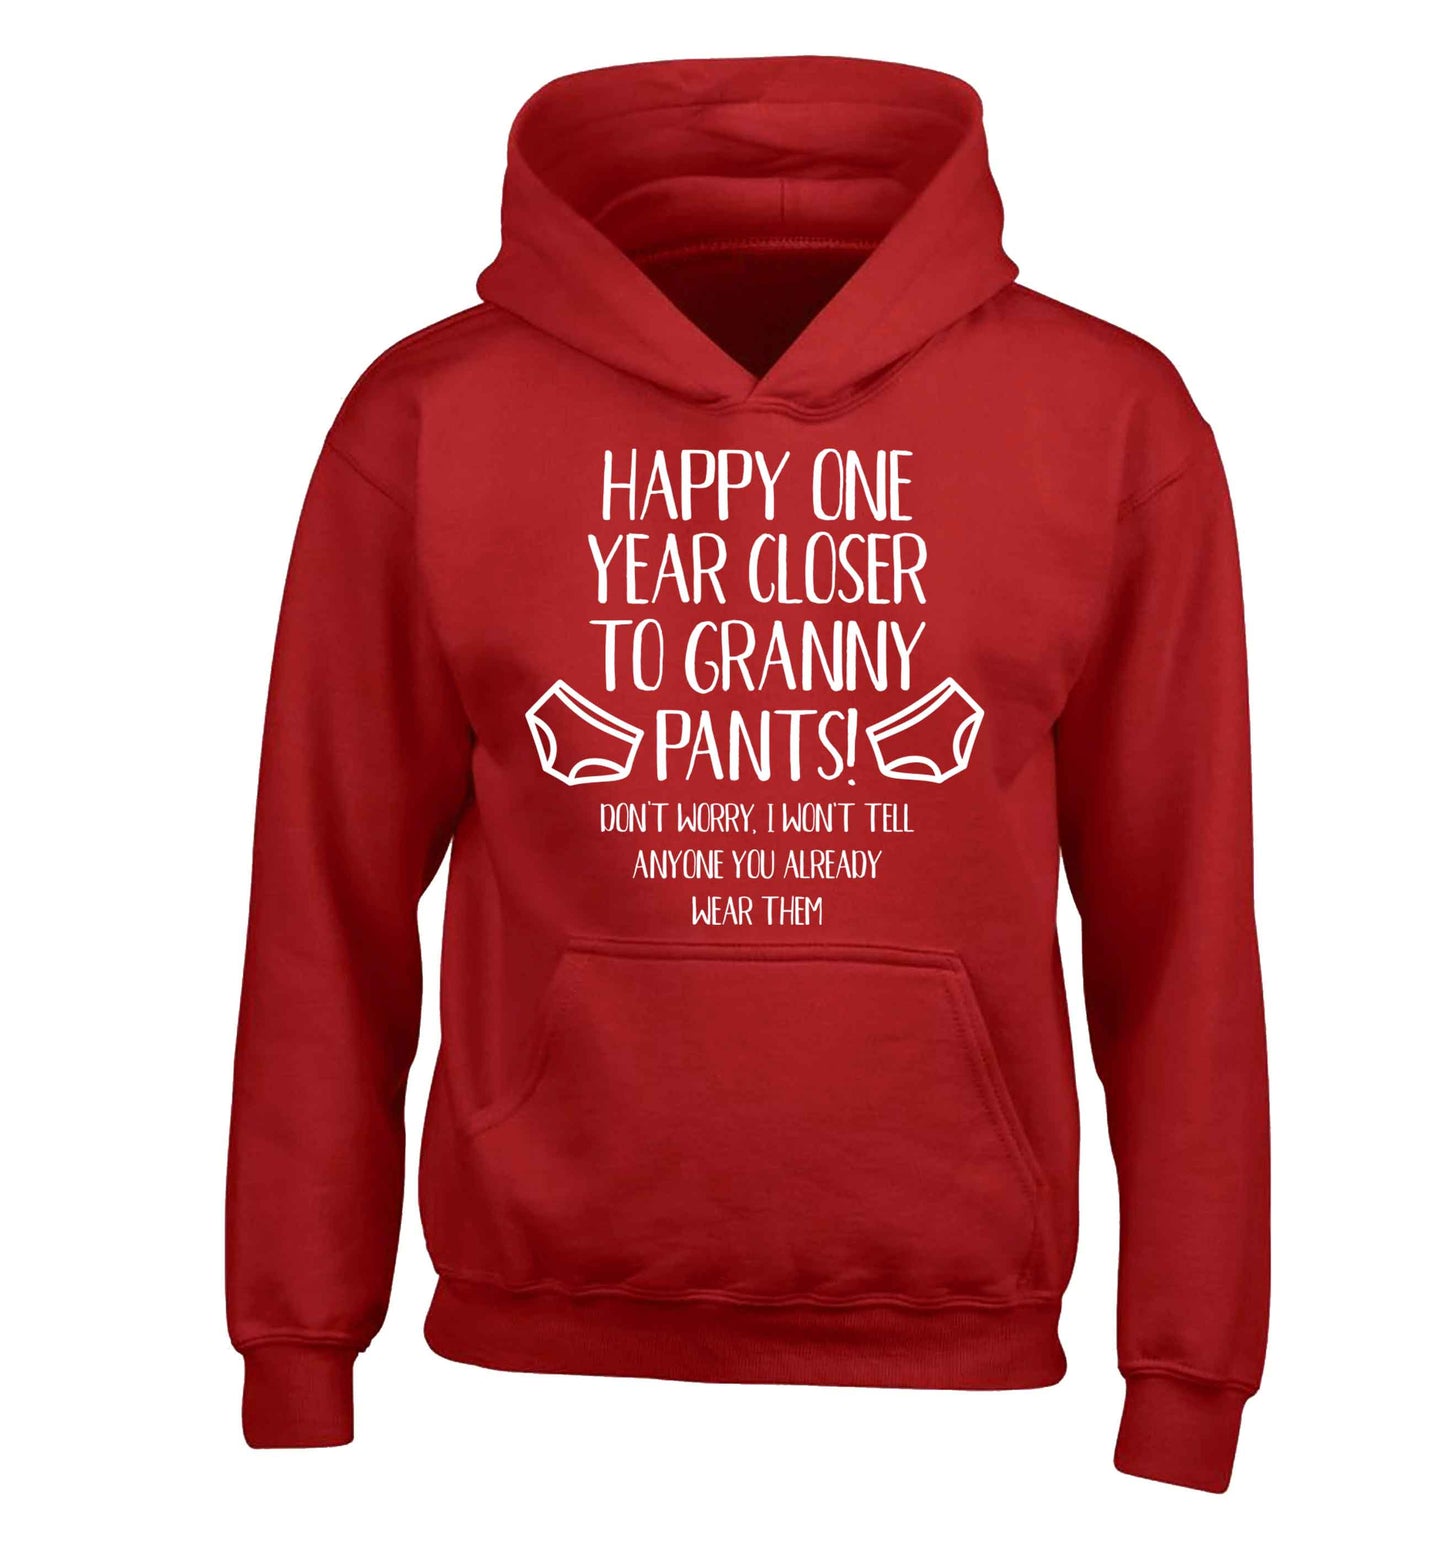 Happy one year closer to granny pants children's red hoodie 12-13 Years